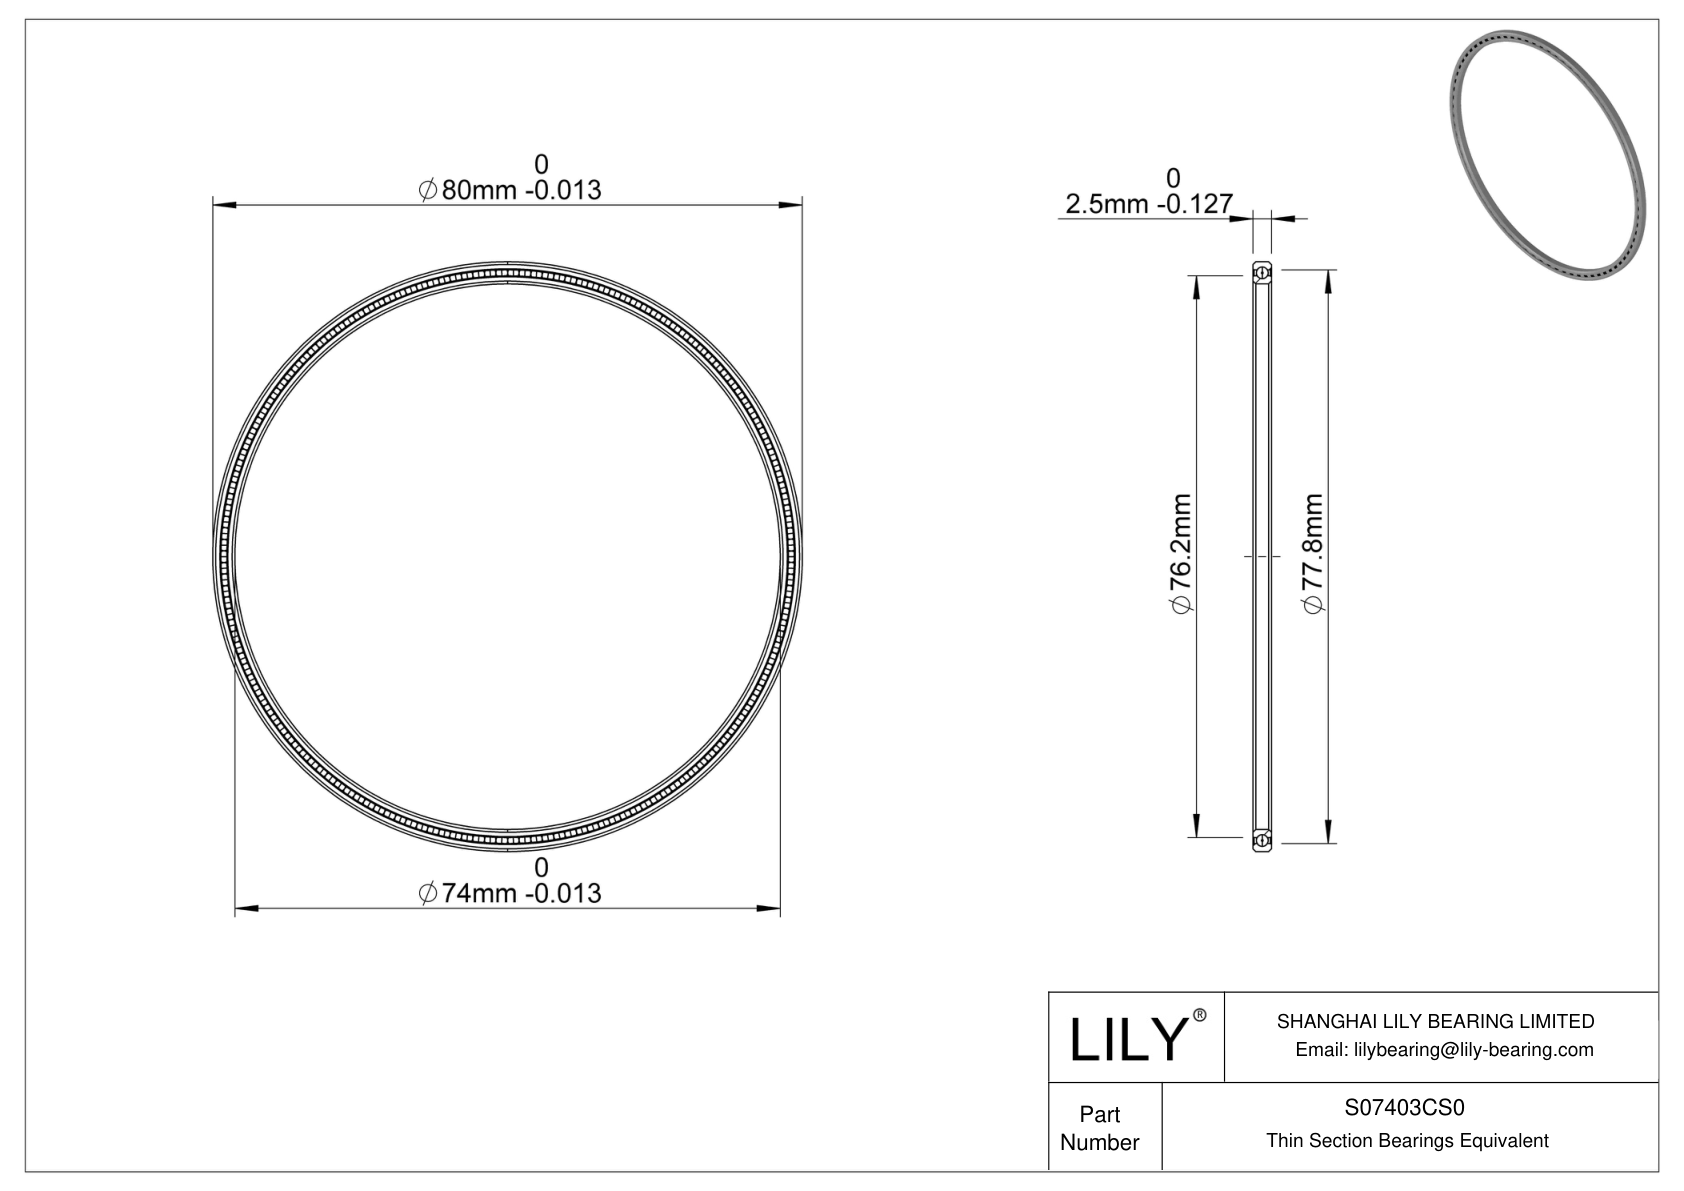 S07403CS0 Constant Section (CS) Bearings cad drawing